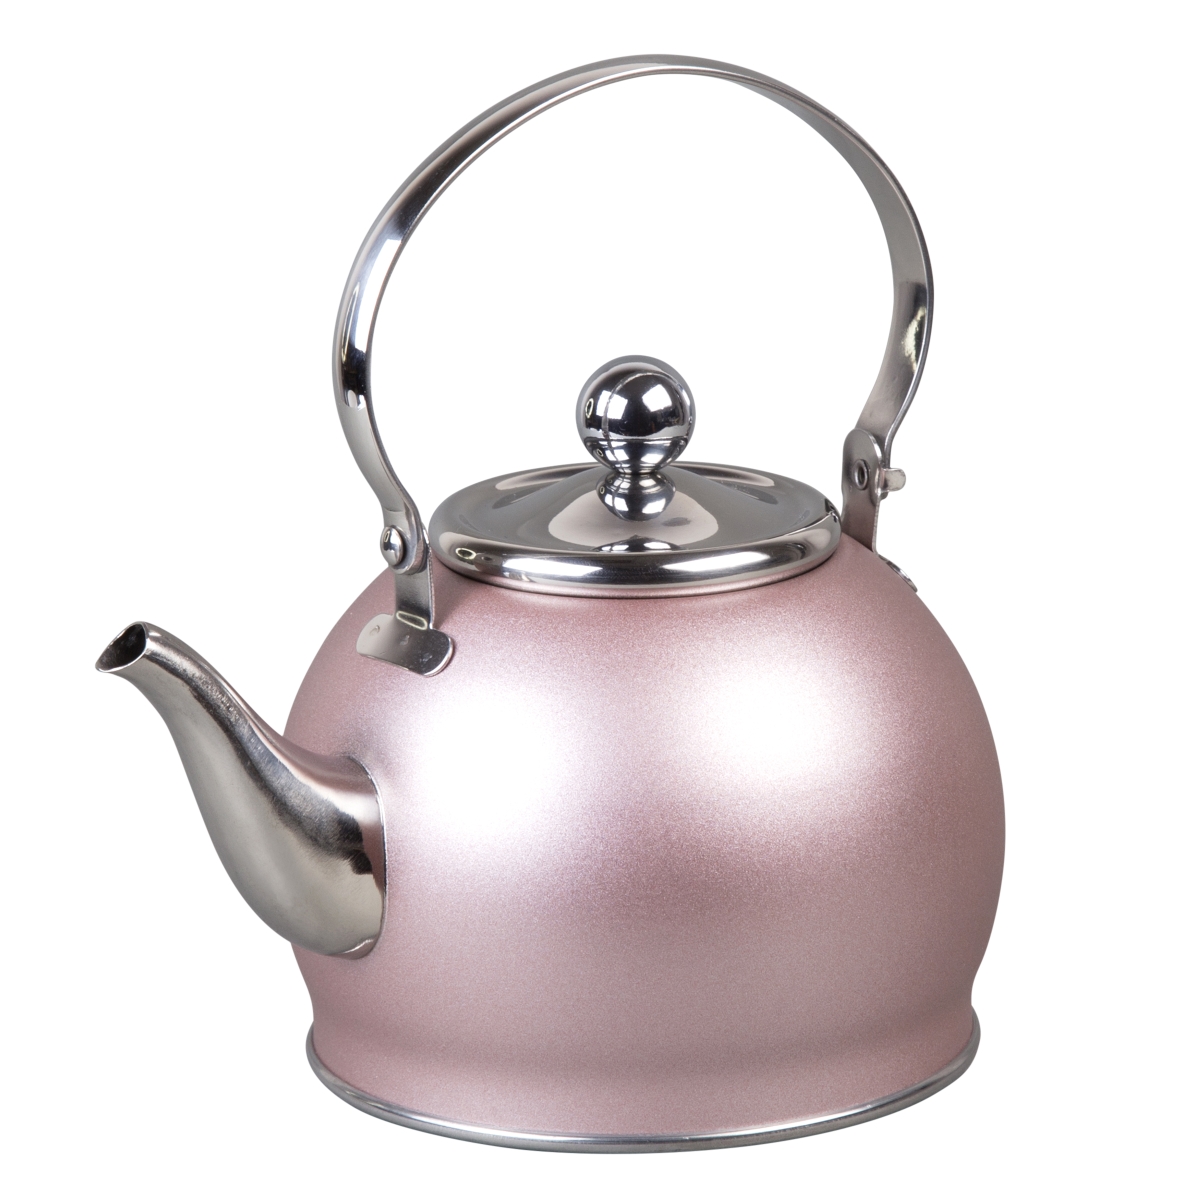 77098 1 Qt. Royal Stainless Steel Tea Kettle With Removable Infuser Basket & Folding Handle - Rose Gold